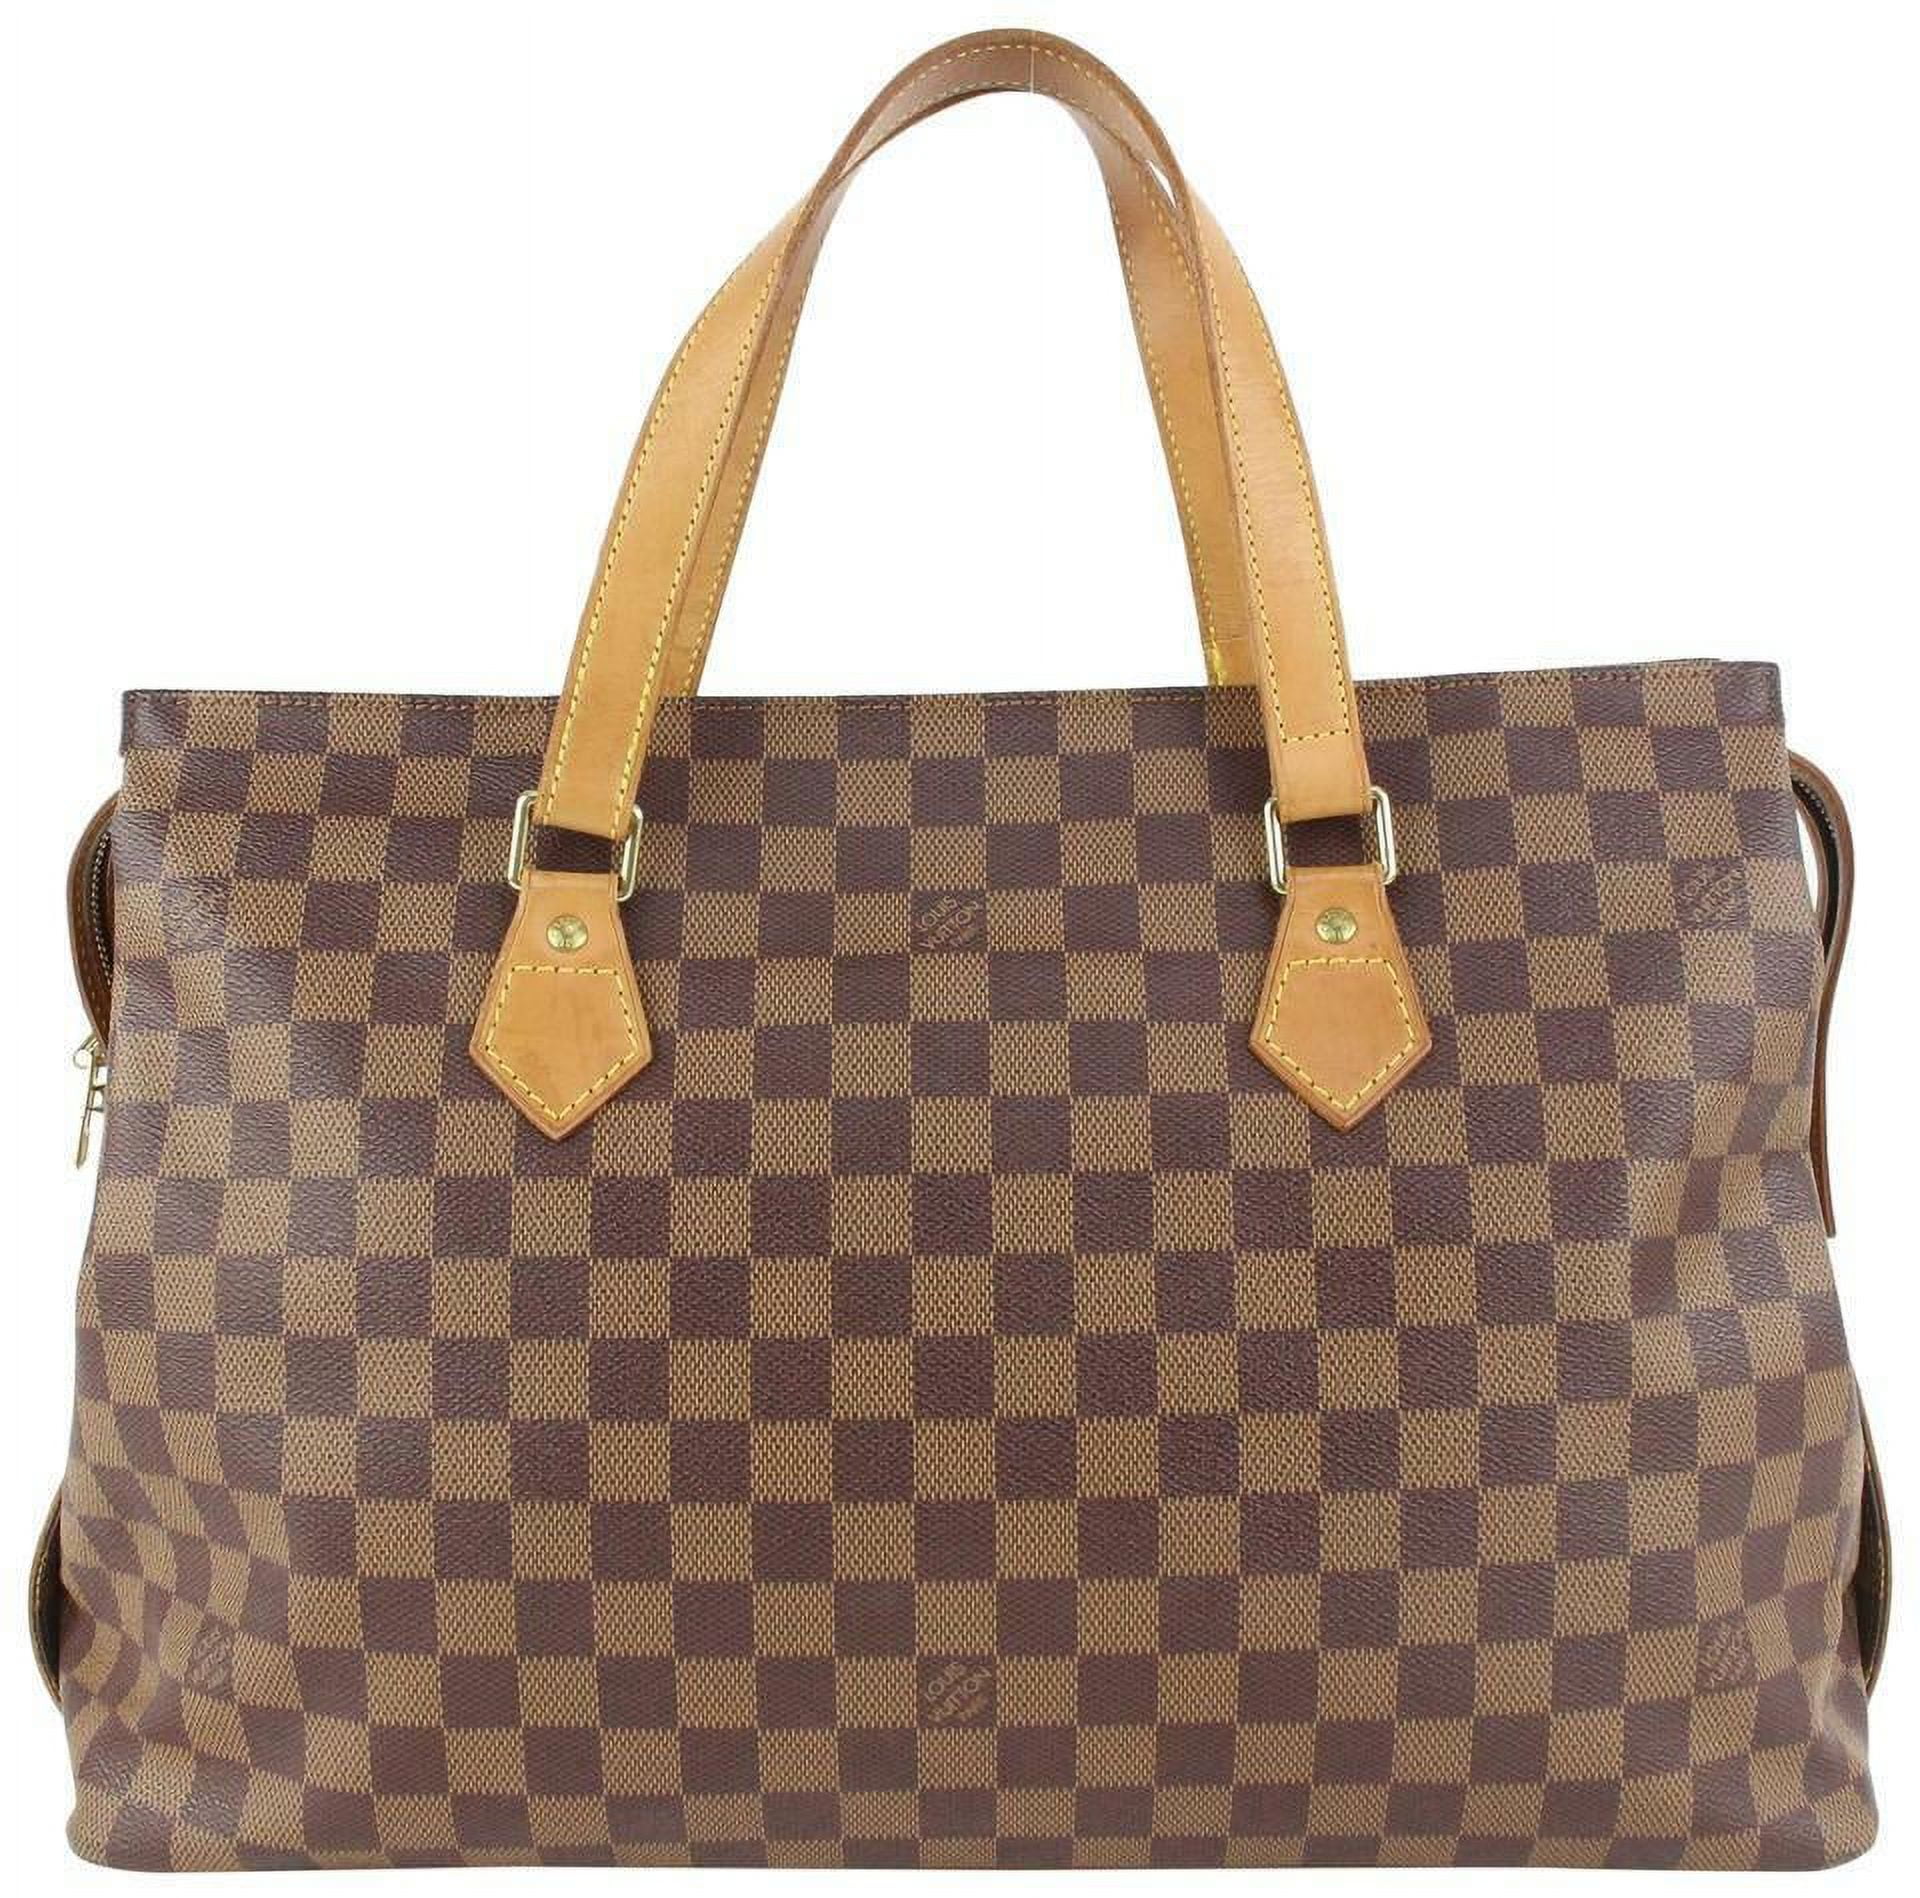 lv tote with zipper